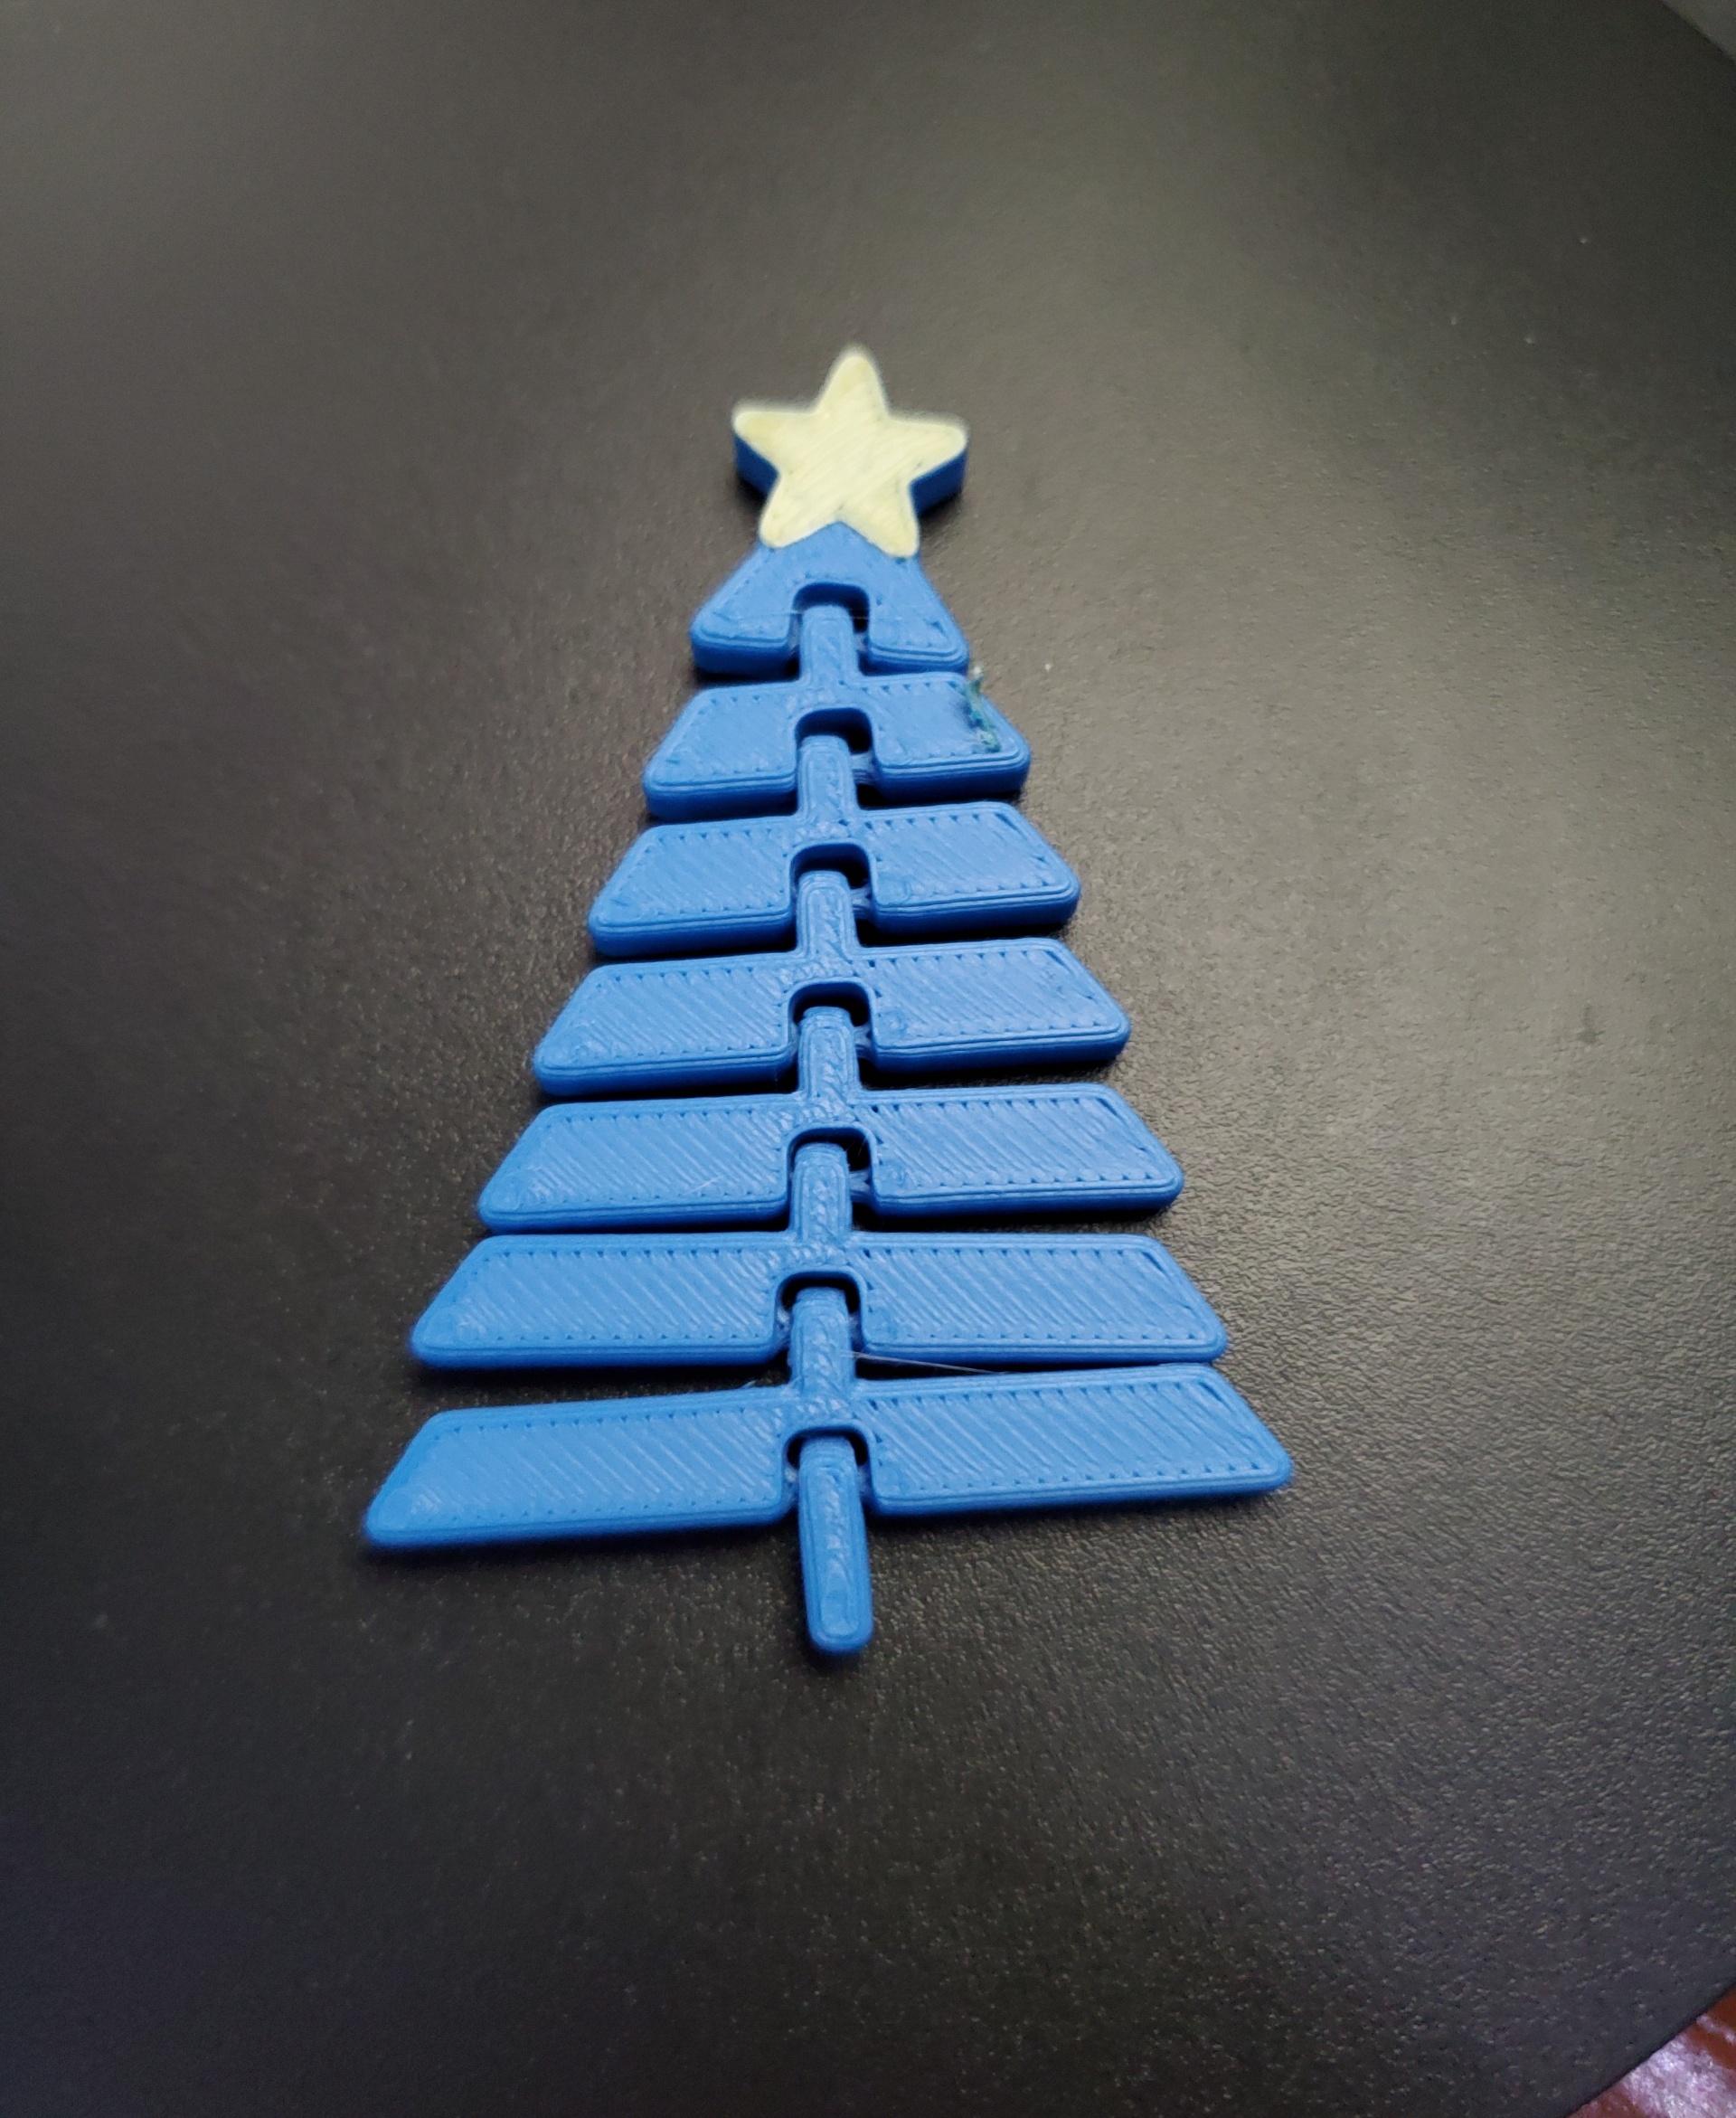 Articulated Christmas Tree with Star - Print in place fidget toy - 3mf - polyterra sapphire blue - 3d model